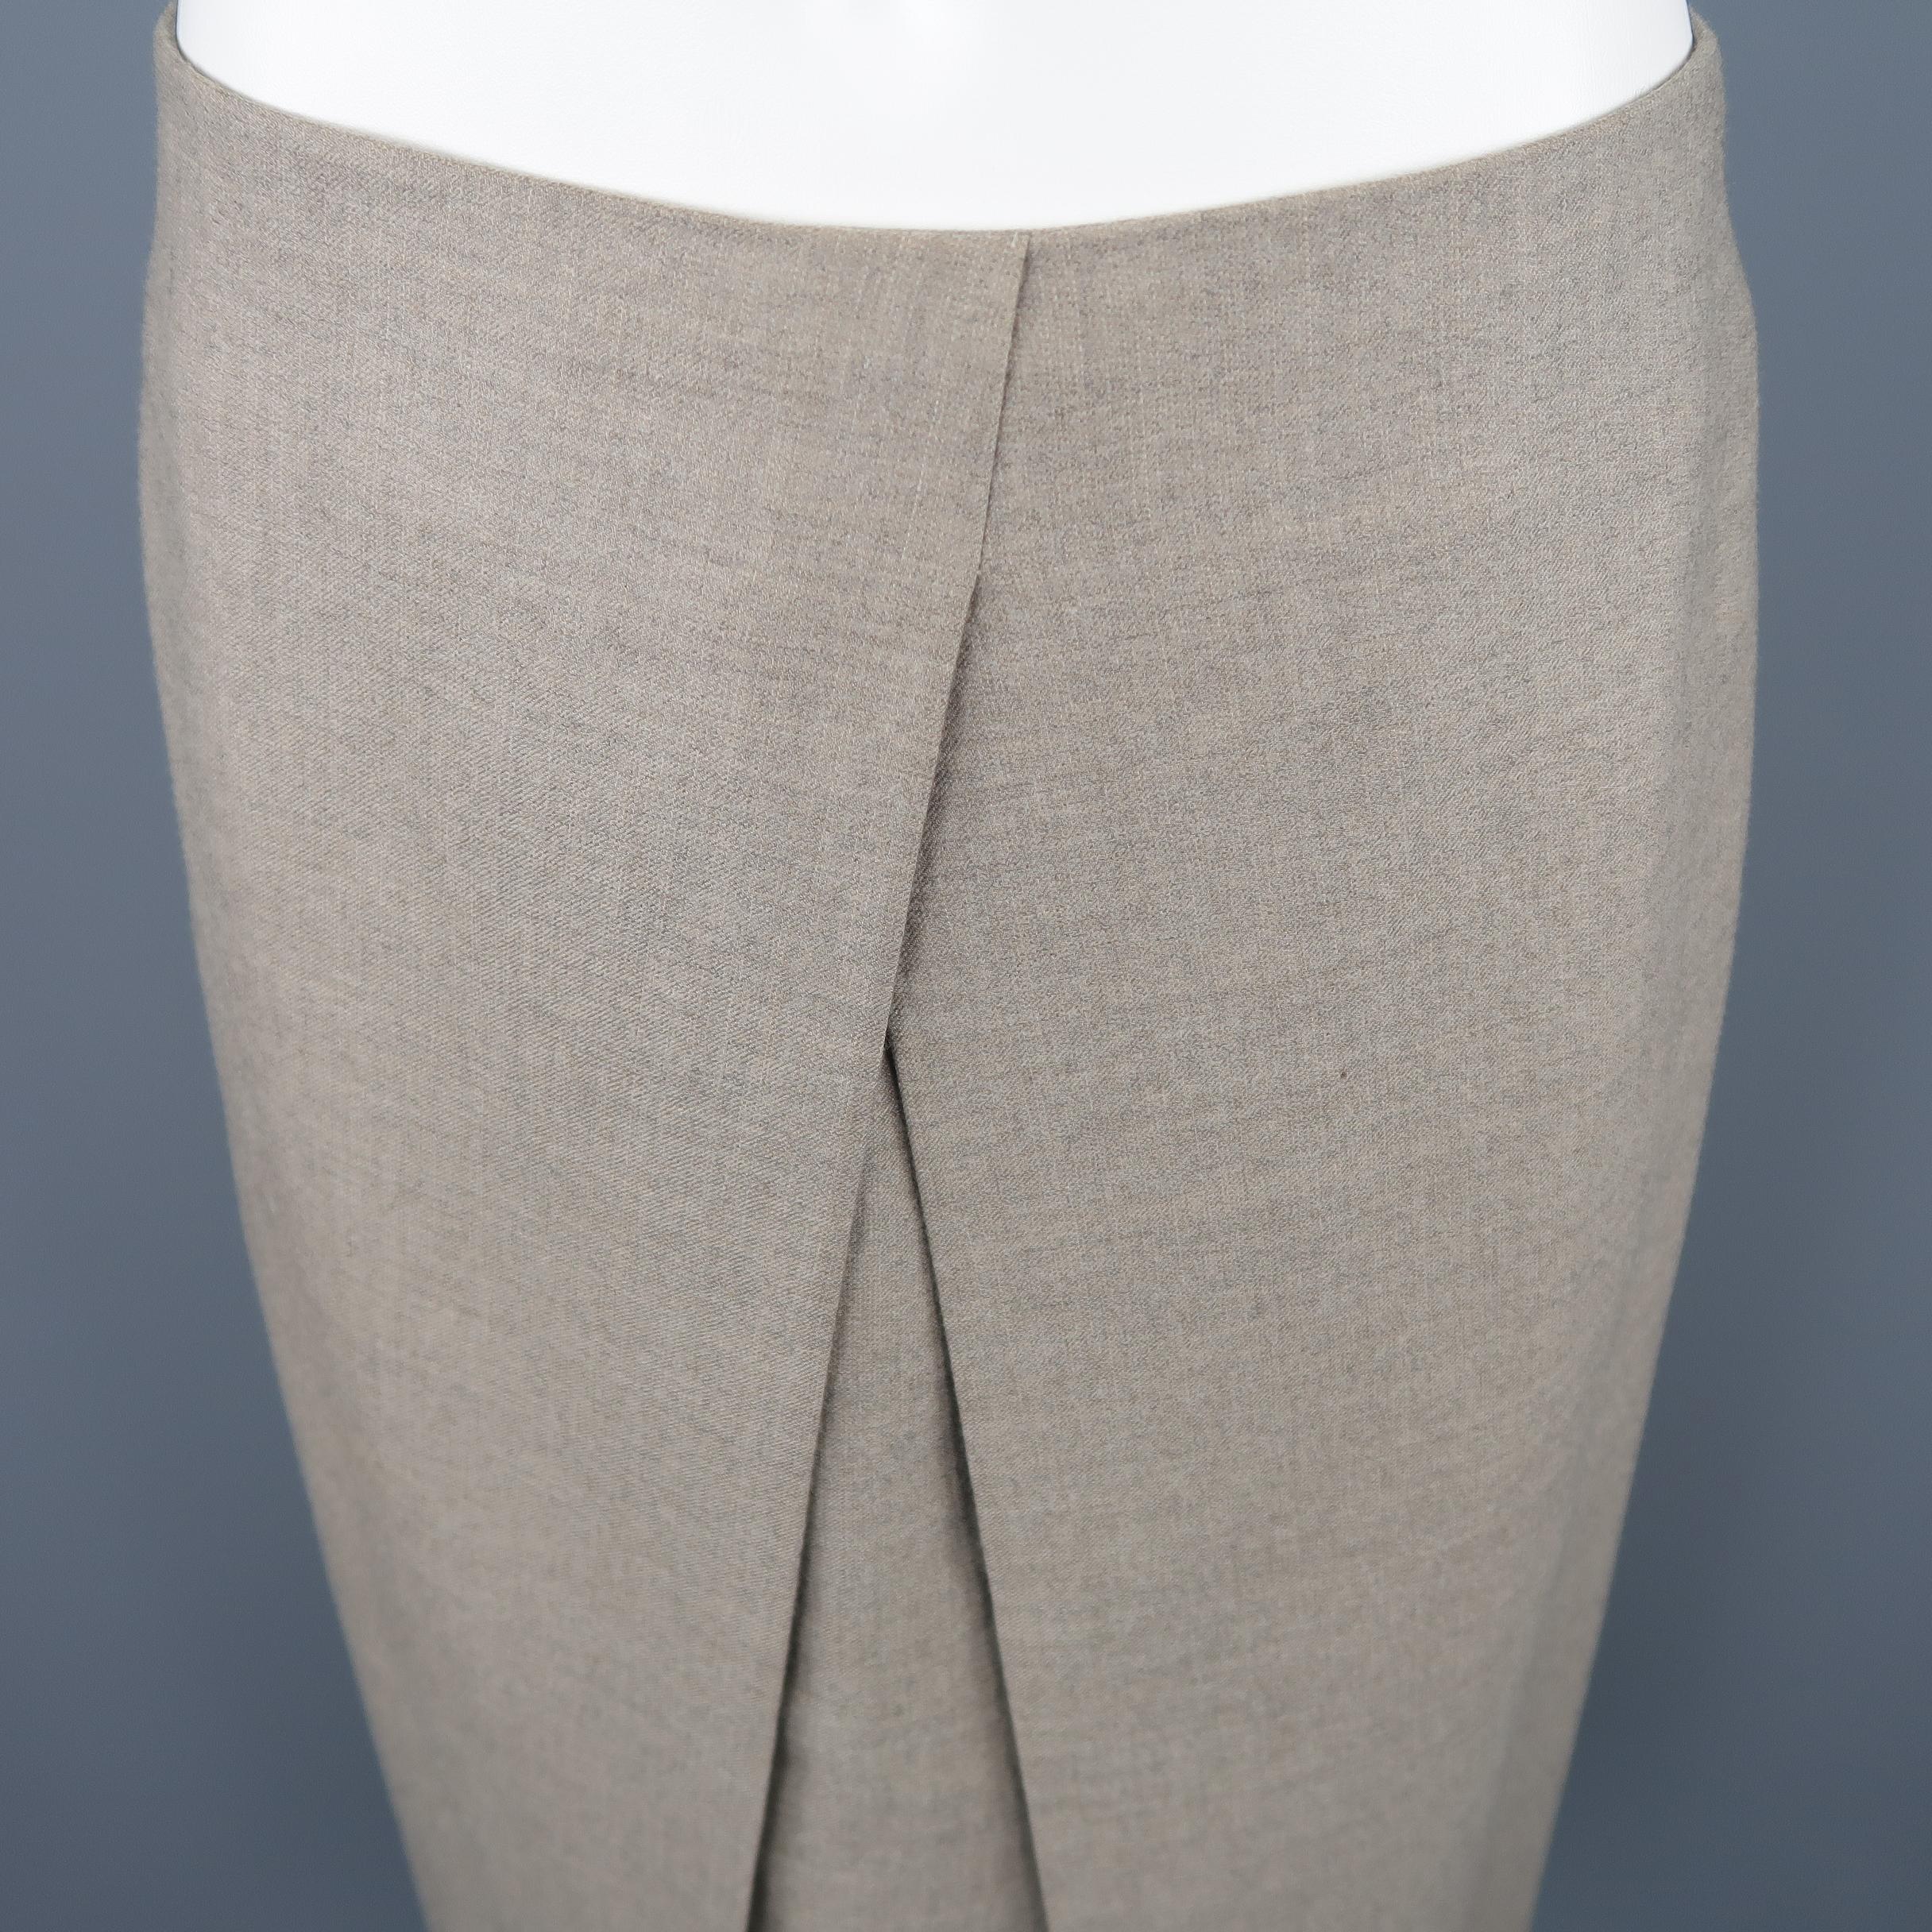 Hermes pleated A-line skirt, come in cashmere in taupe tone, with hidden zipper on the back and lined interior. Made in France.
 
Excellent Pre-Owned Condition.
Marked: 40
 
Measurements:
 
Waist: 29 in.
Hip: 38 in.
Length: 26 in.  